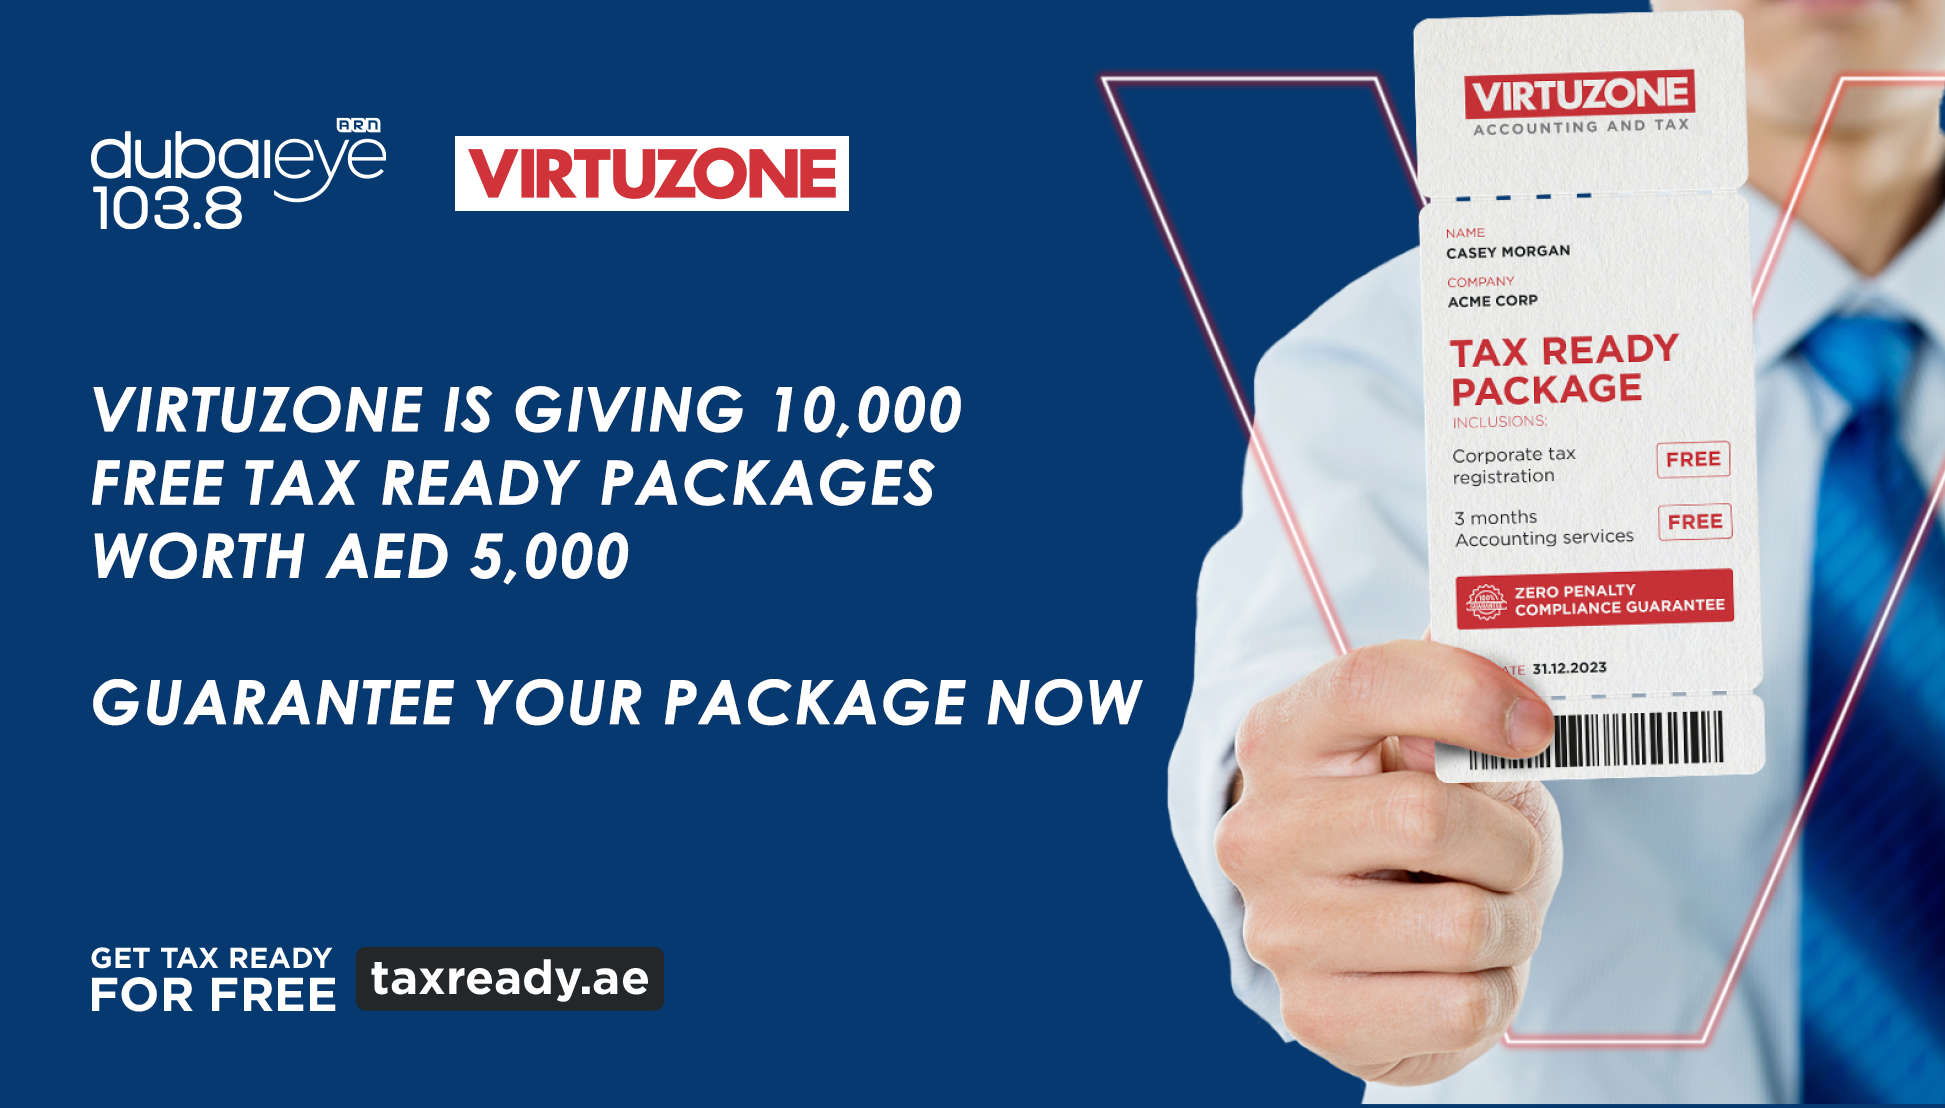 Get Tax Ready With Virtuzone